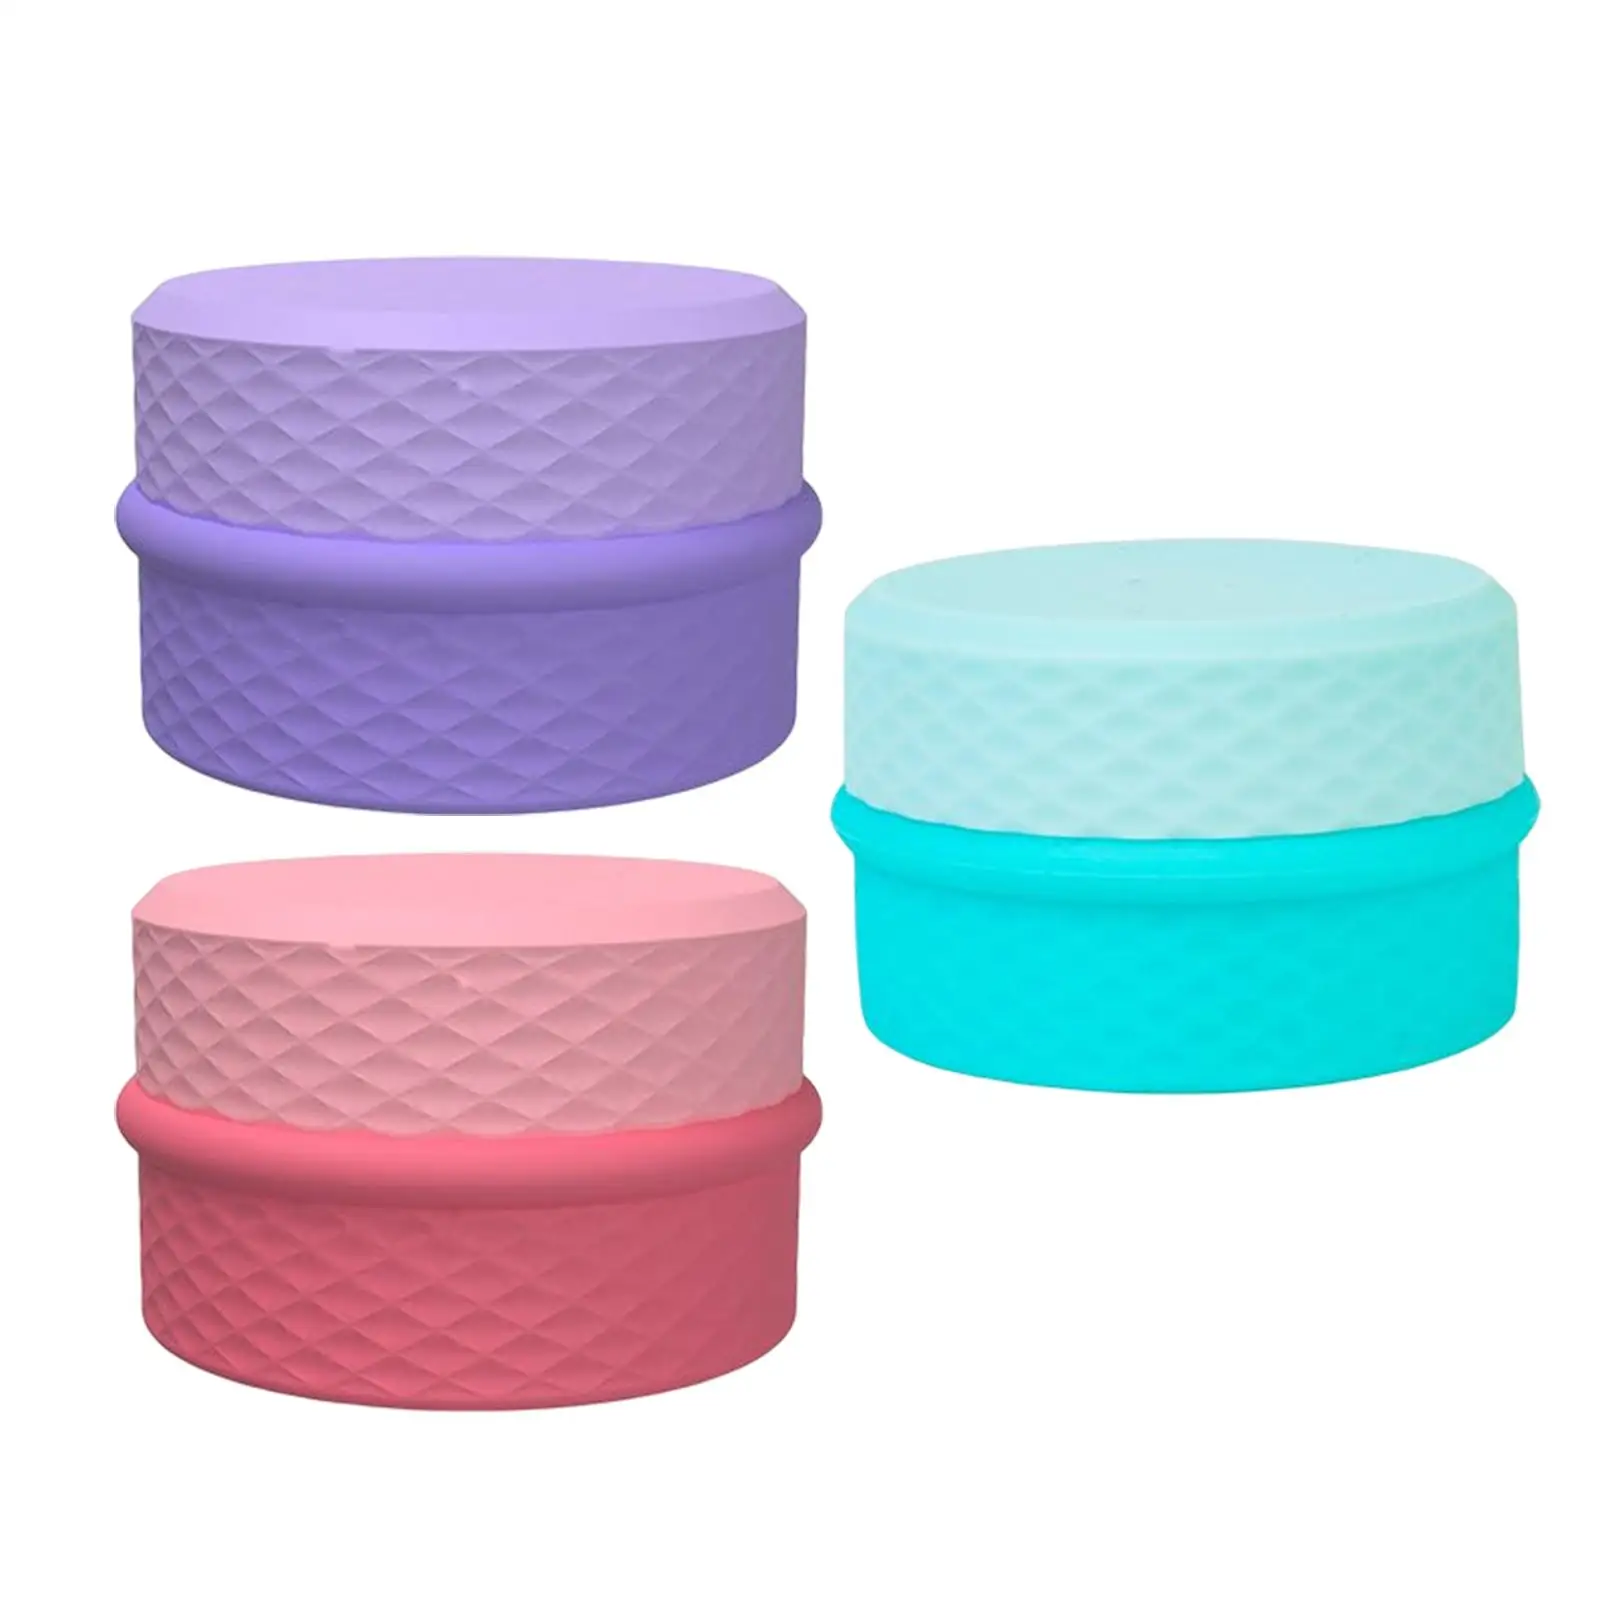 Cosmetics Cream Jars Makeup Sample Containers for Travelling Luggage Handbag